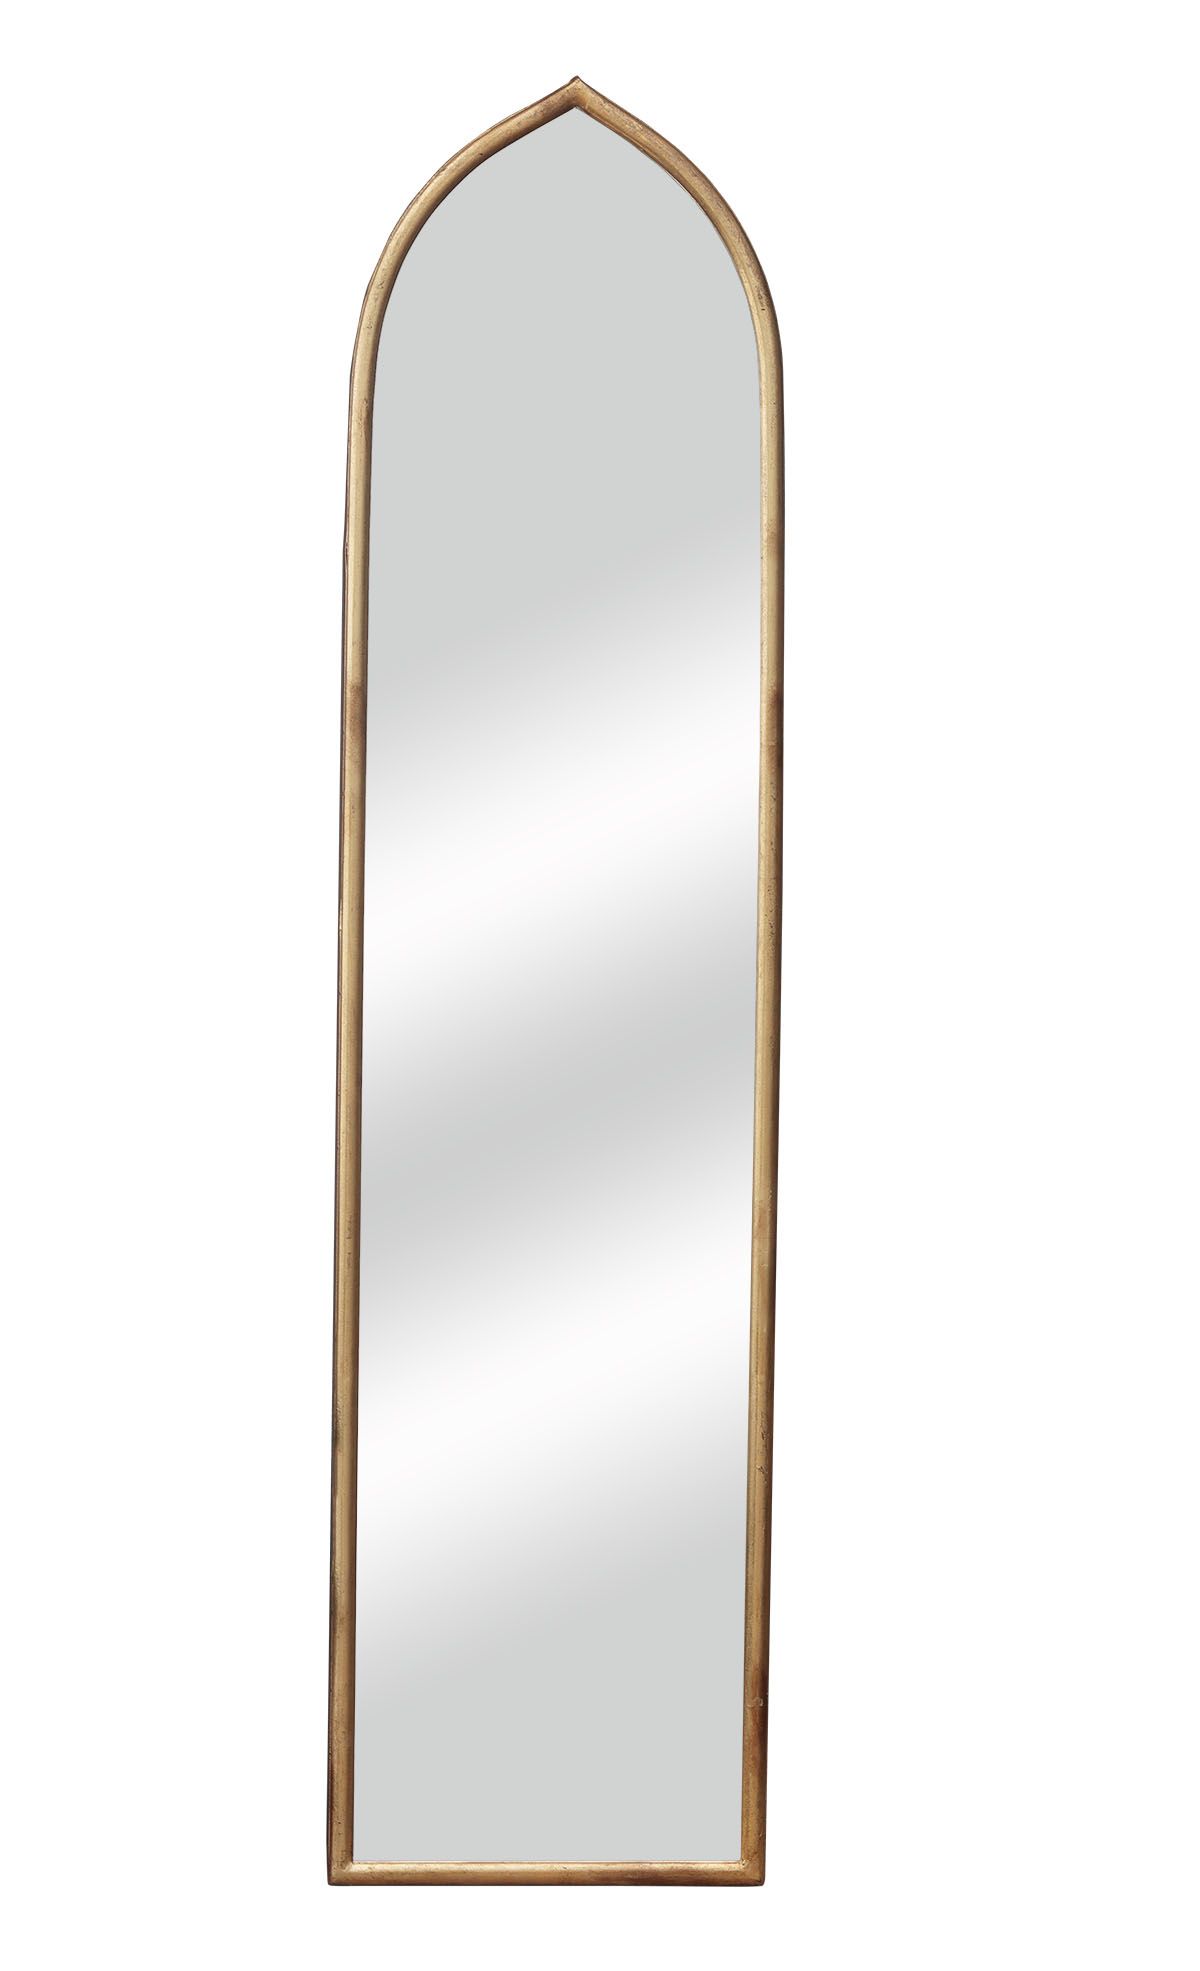 Vintage Full Length Wall Mirror With Arched Metal Frame, Simple Full In Antique Aluminum Wall Mirrors (Photo 15 of 15)